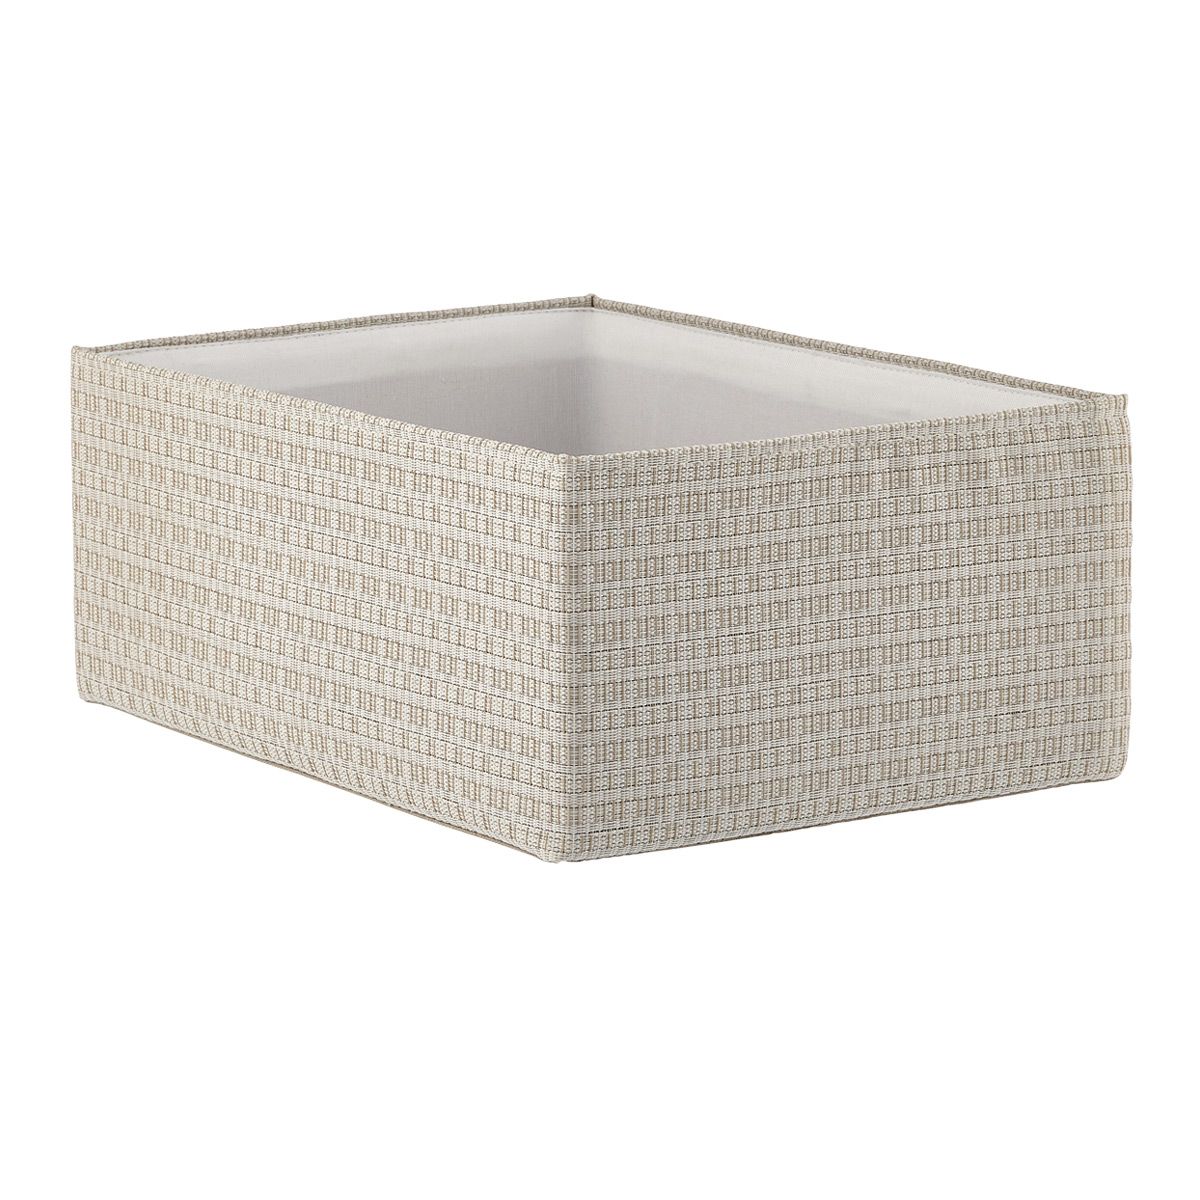 Large Kiva Storage Bin LinenSKU:100852684.976 Reviews | The Container Store